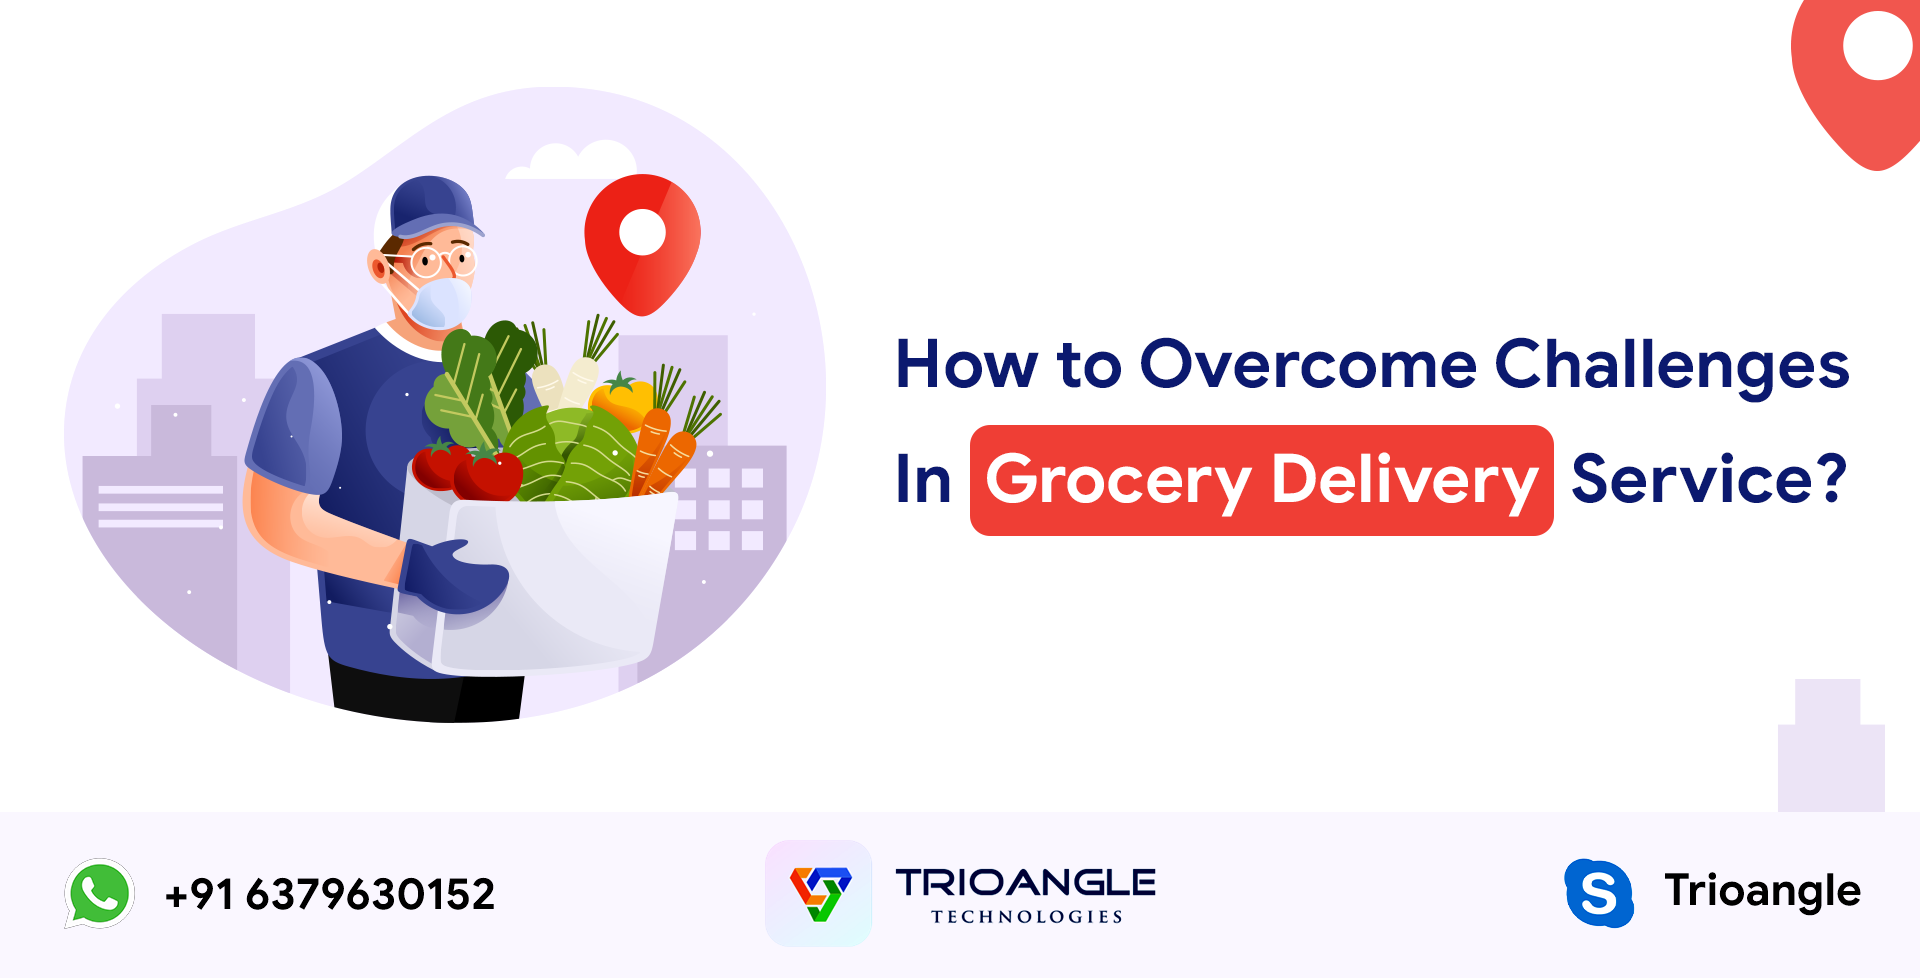 How to Overcome Challenges in Grocery Delivery Service?